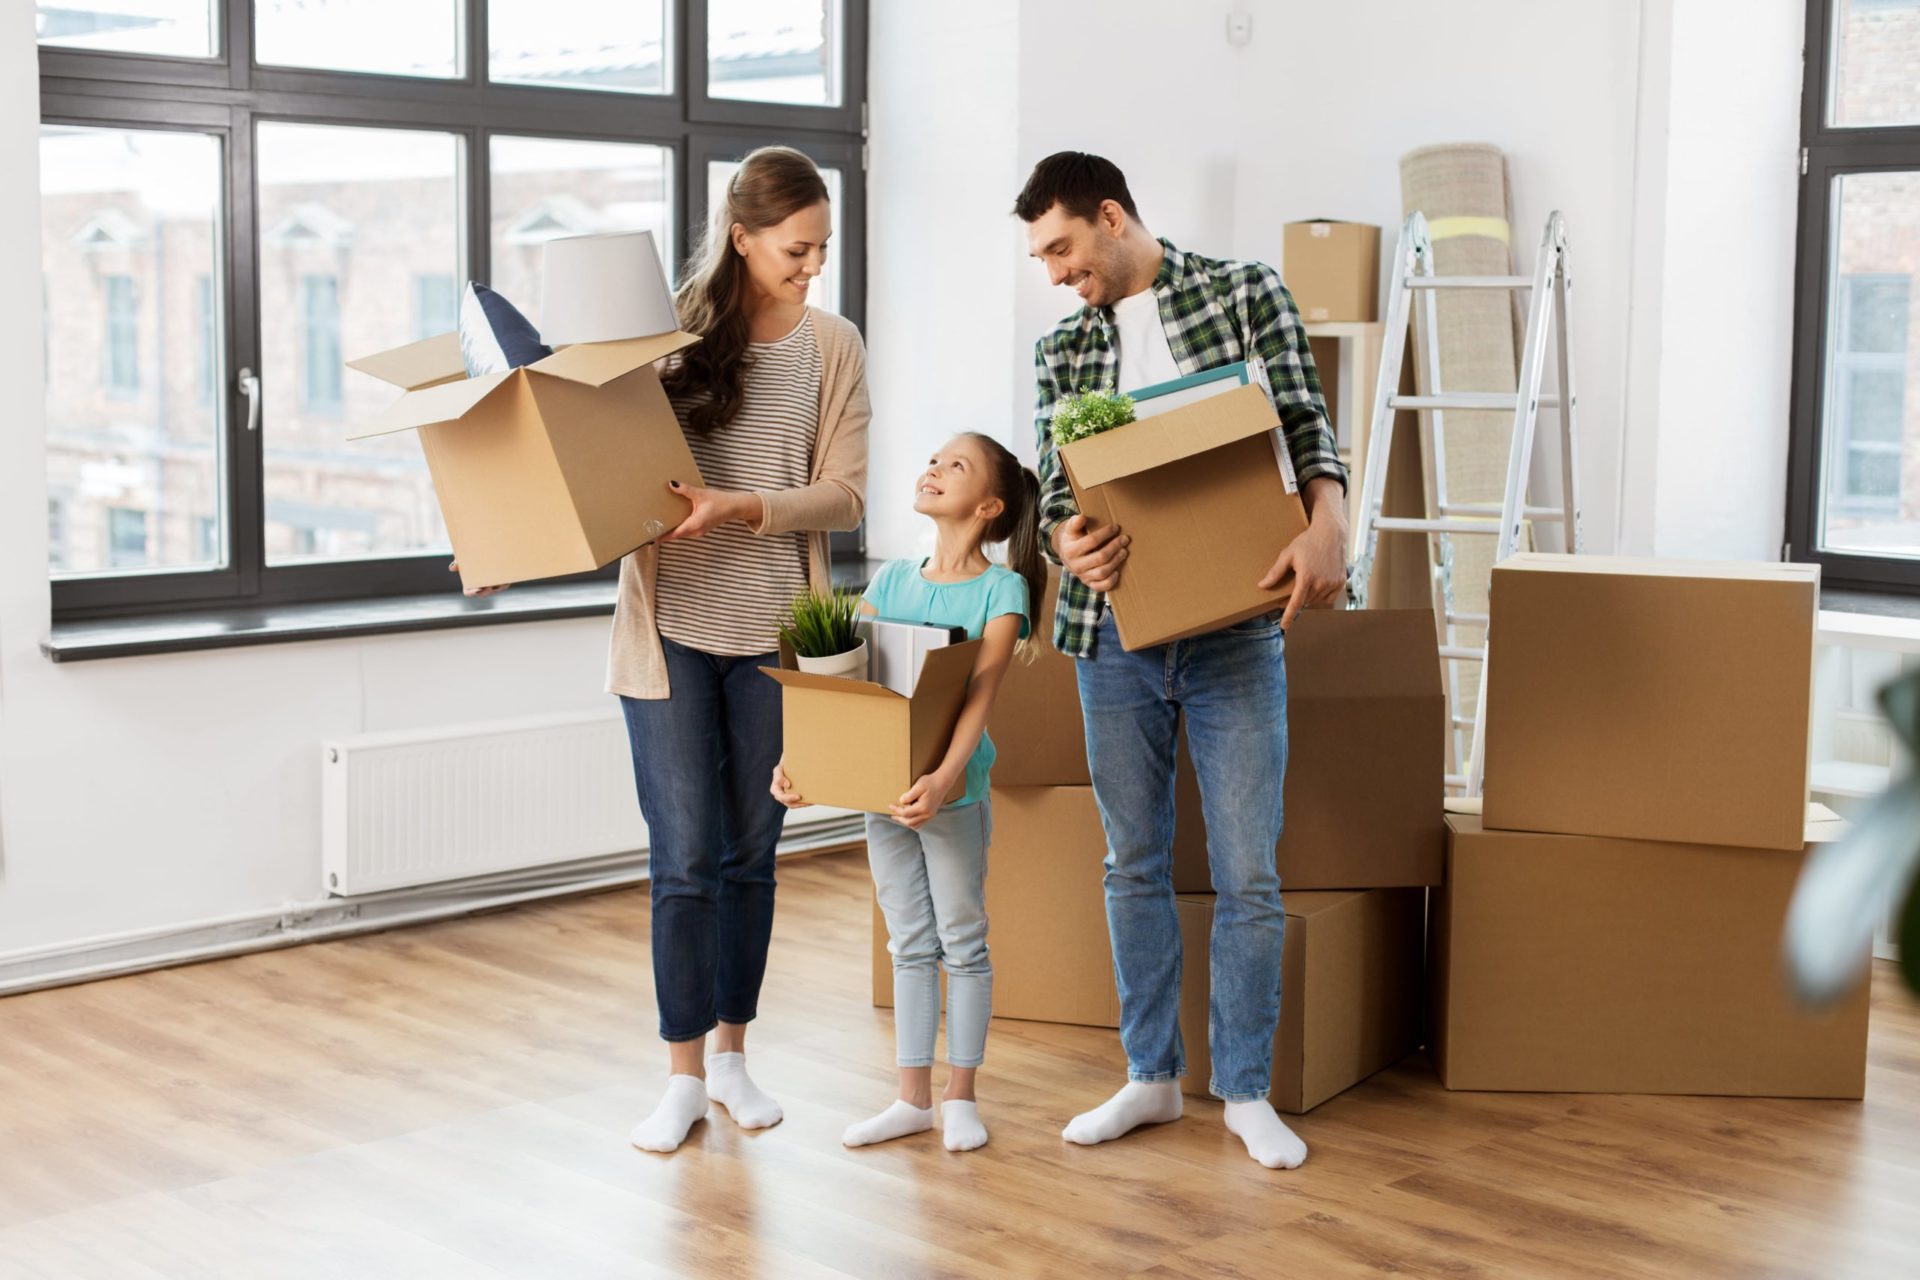 A happy family with moving boxes in an empty room